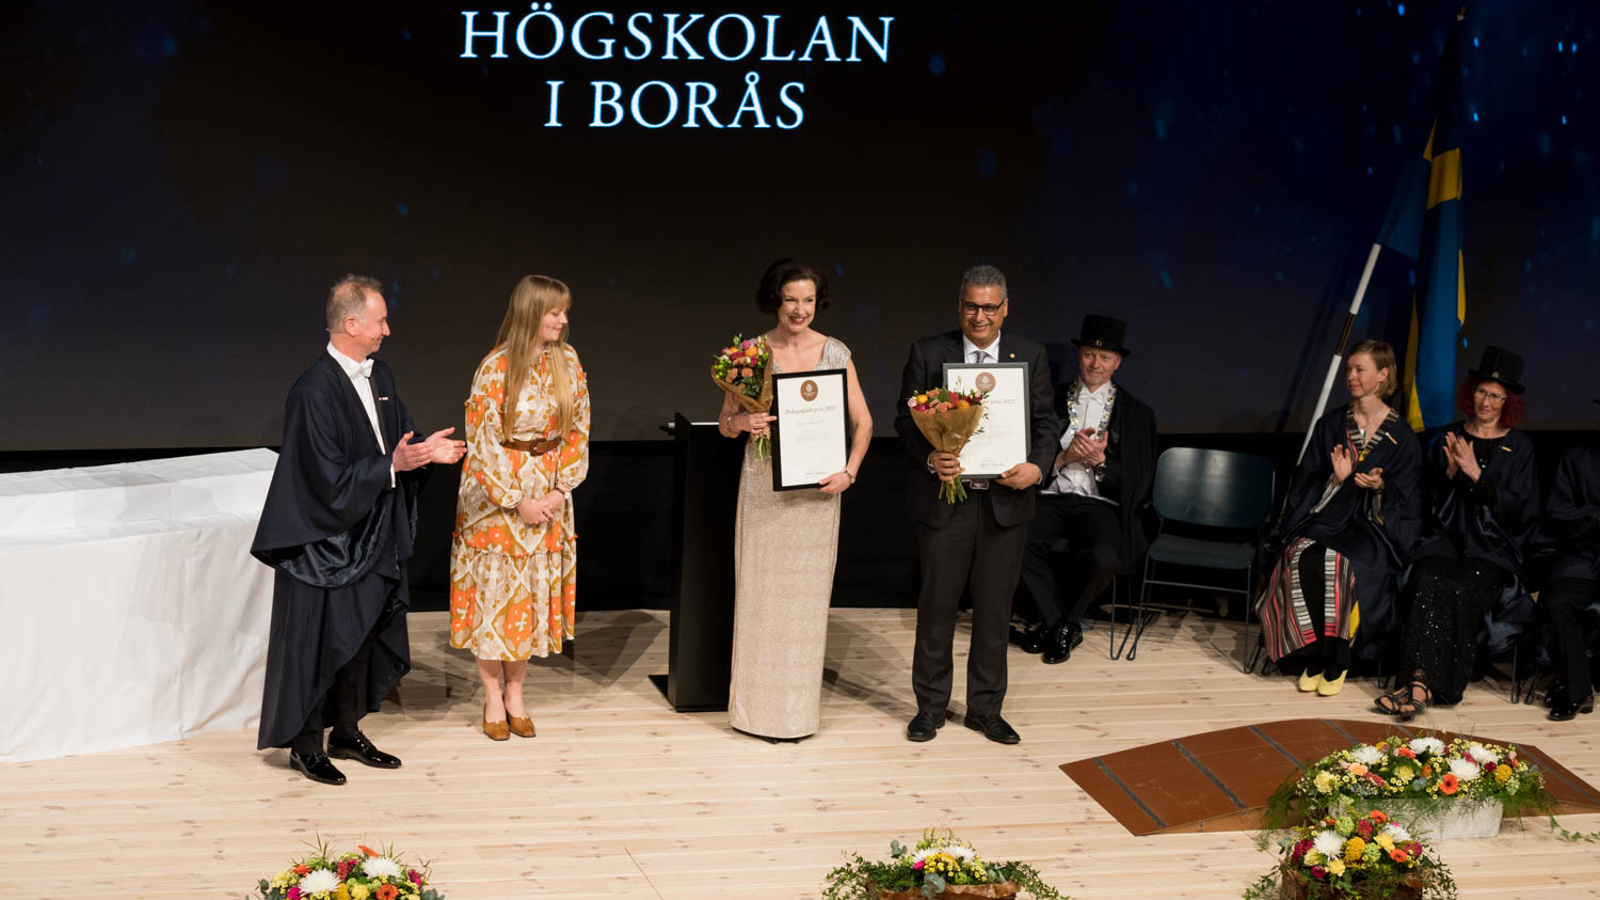 Jeanette Carlsson Hauff and Kamran Rousta holding their diplomas